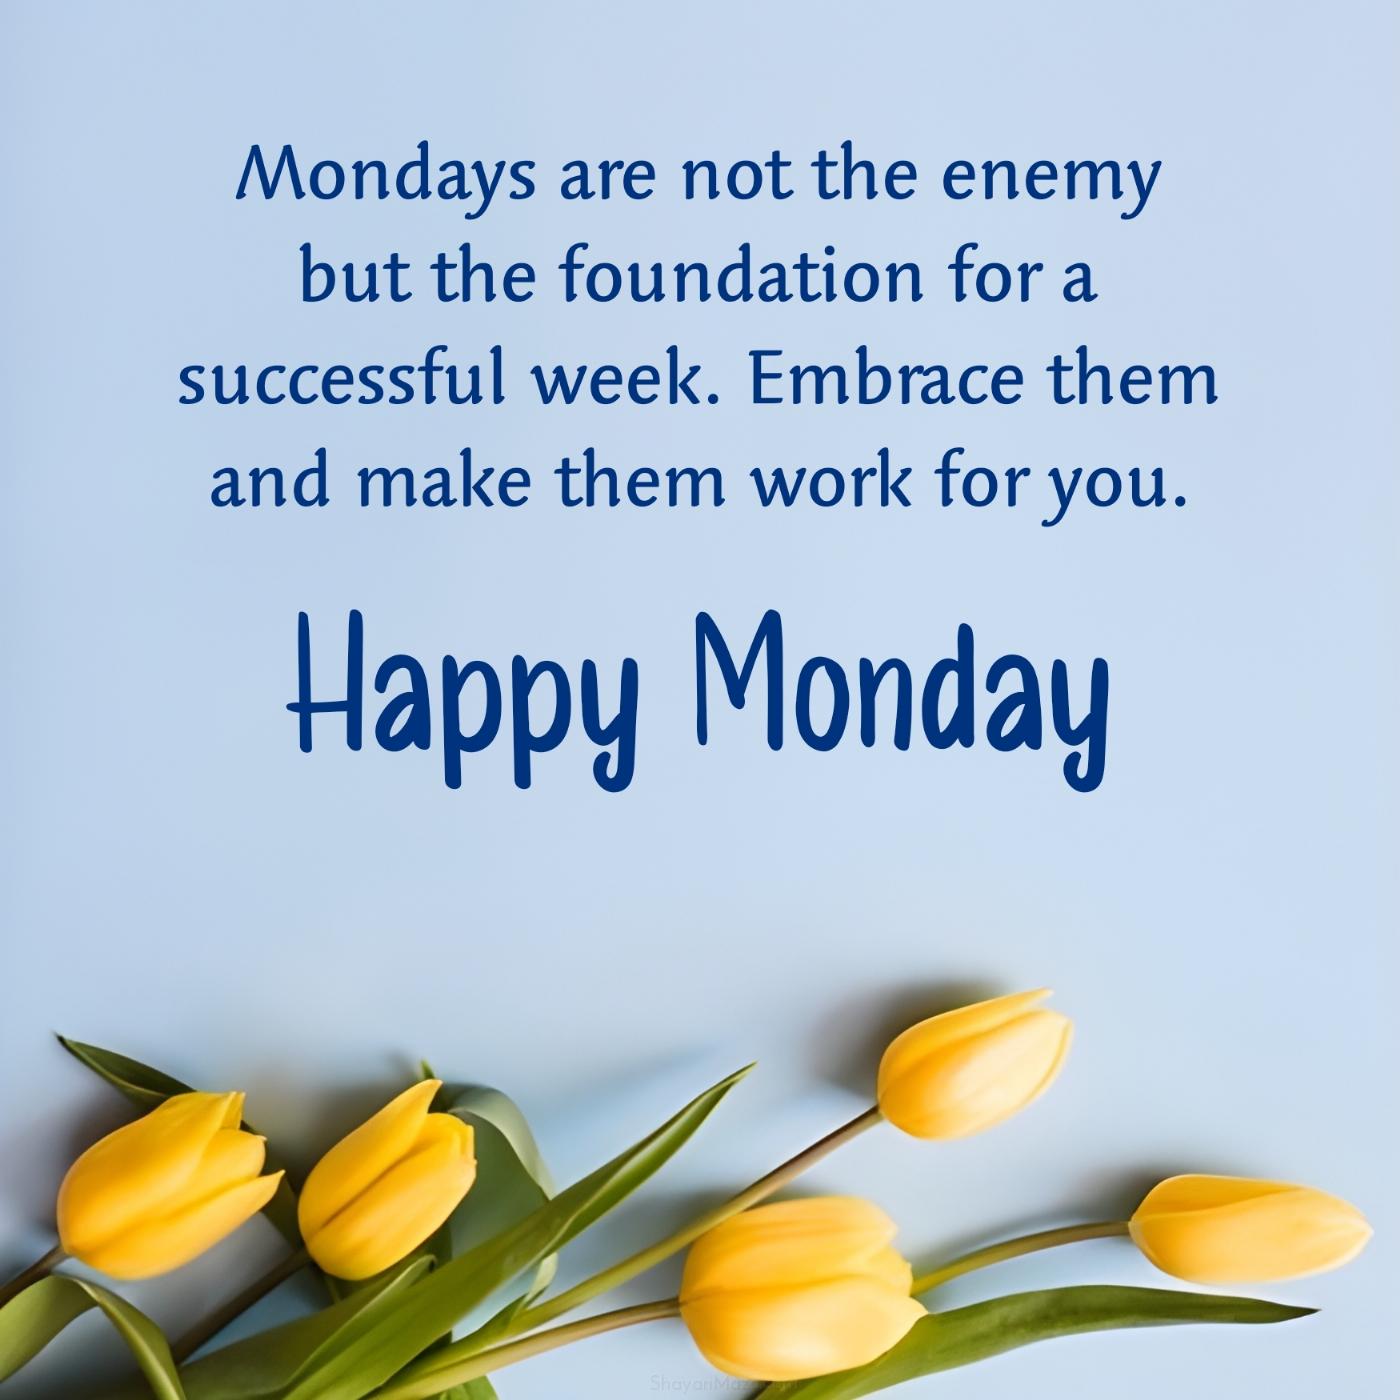 Mondays are not the enemy but the foundation for a successful week